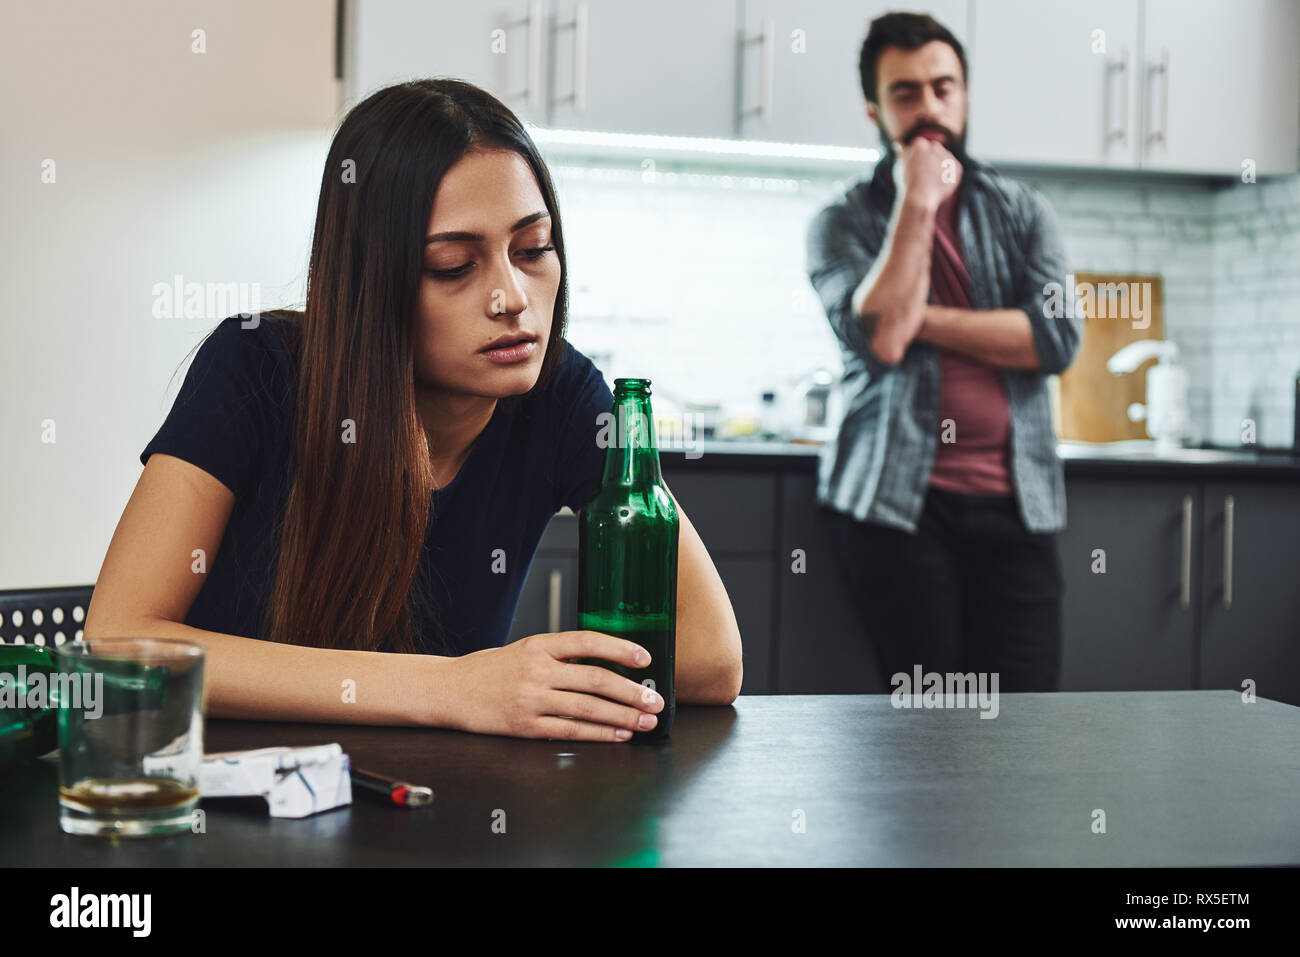 Drunkard. Angry man feeling despair while looking at his drunk wife. She is drinking in the kitchen, wasted. Empty bottles are on the table near her. Stock Photo